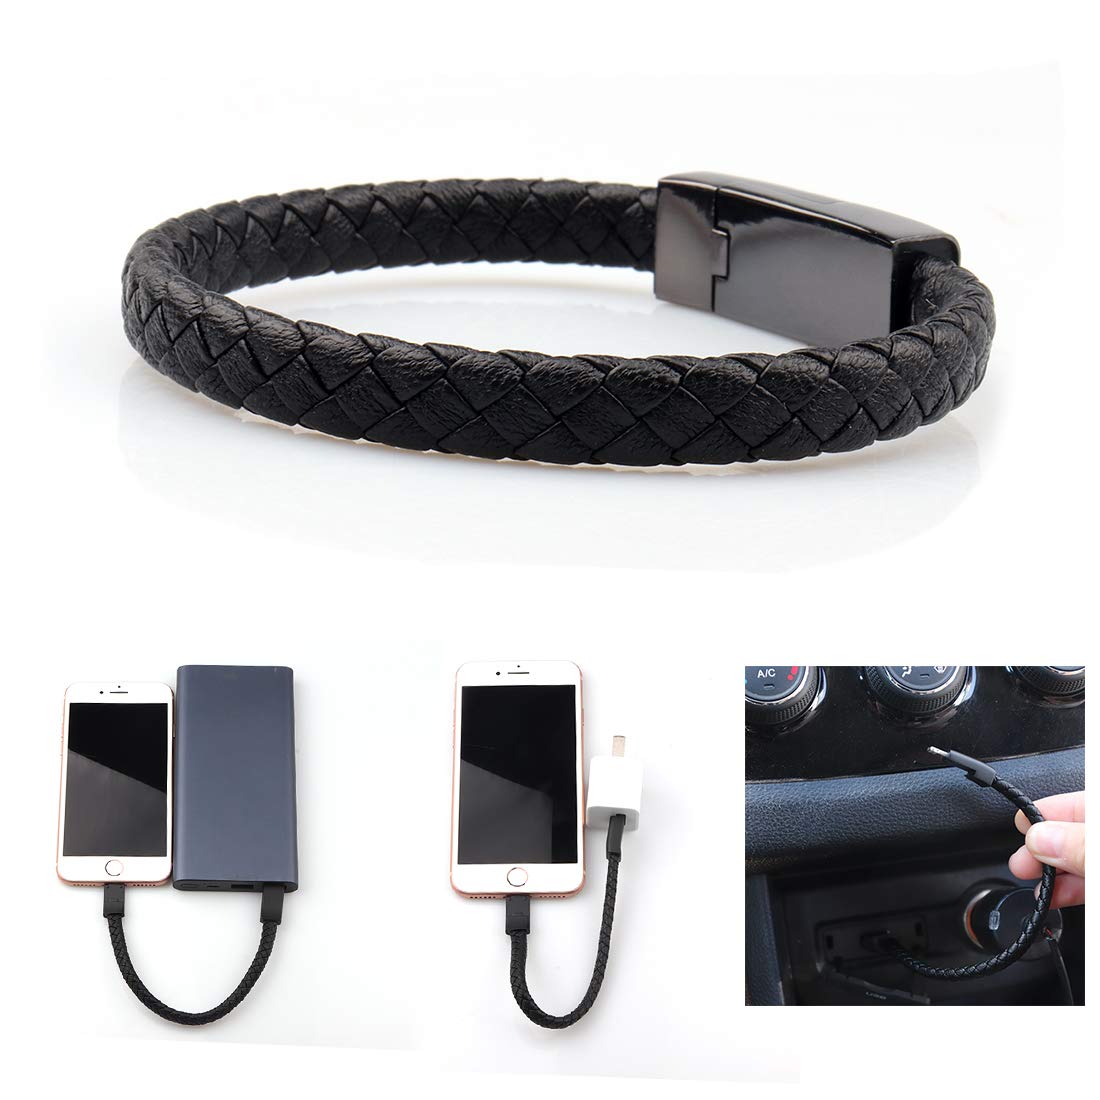 Leather Bracelet USB Cable Portable Fast Charging For All Mobile Phone